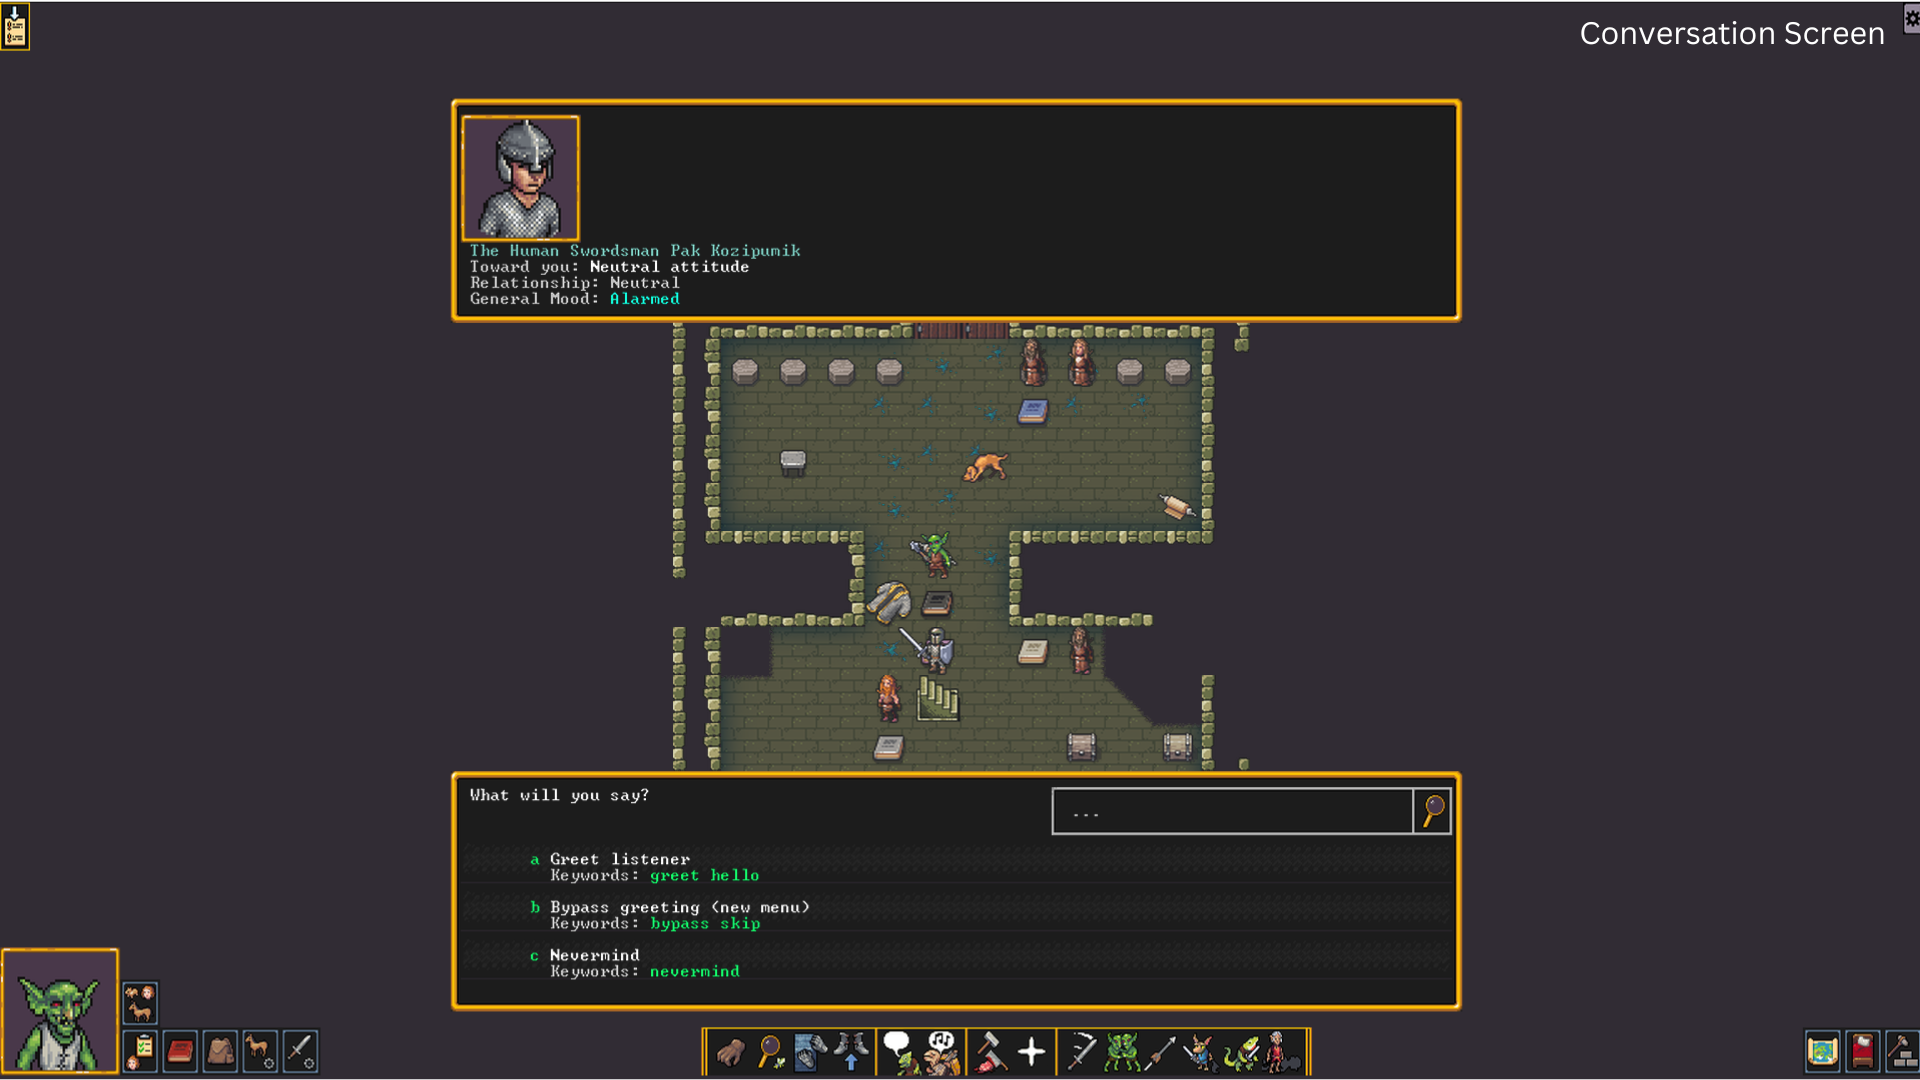 dwarf fortress's graphical adventure mode launches today, includes extremely dwarf fortress touches like '186 animal people portraits' and a unique sound effect for walking on soap